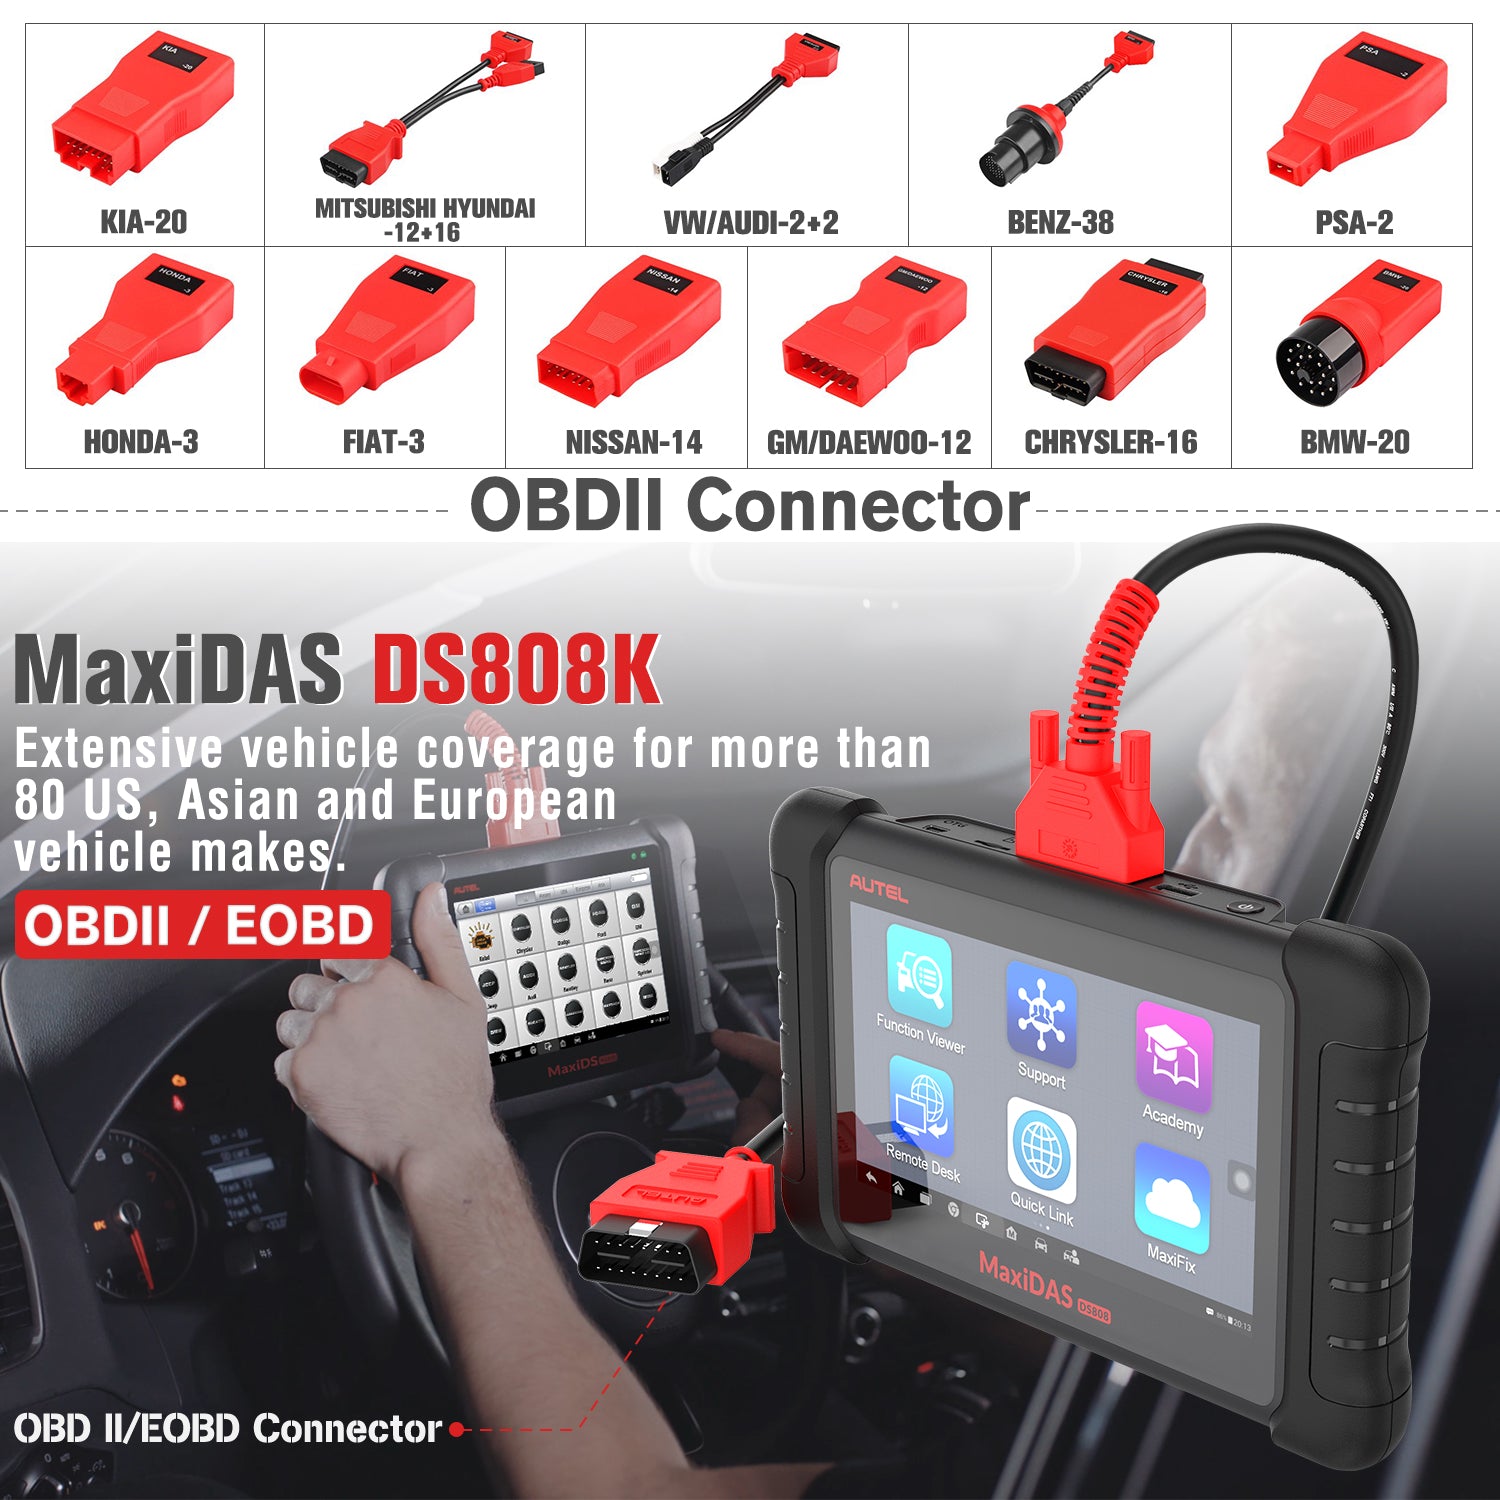 Autel DS808k car diagnostic scanner extensive vehicle coverage with full set 11 Non-Standard OBD Adapters